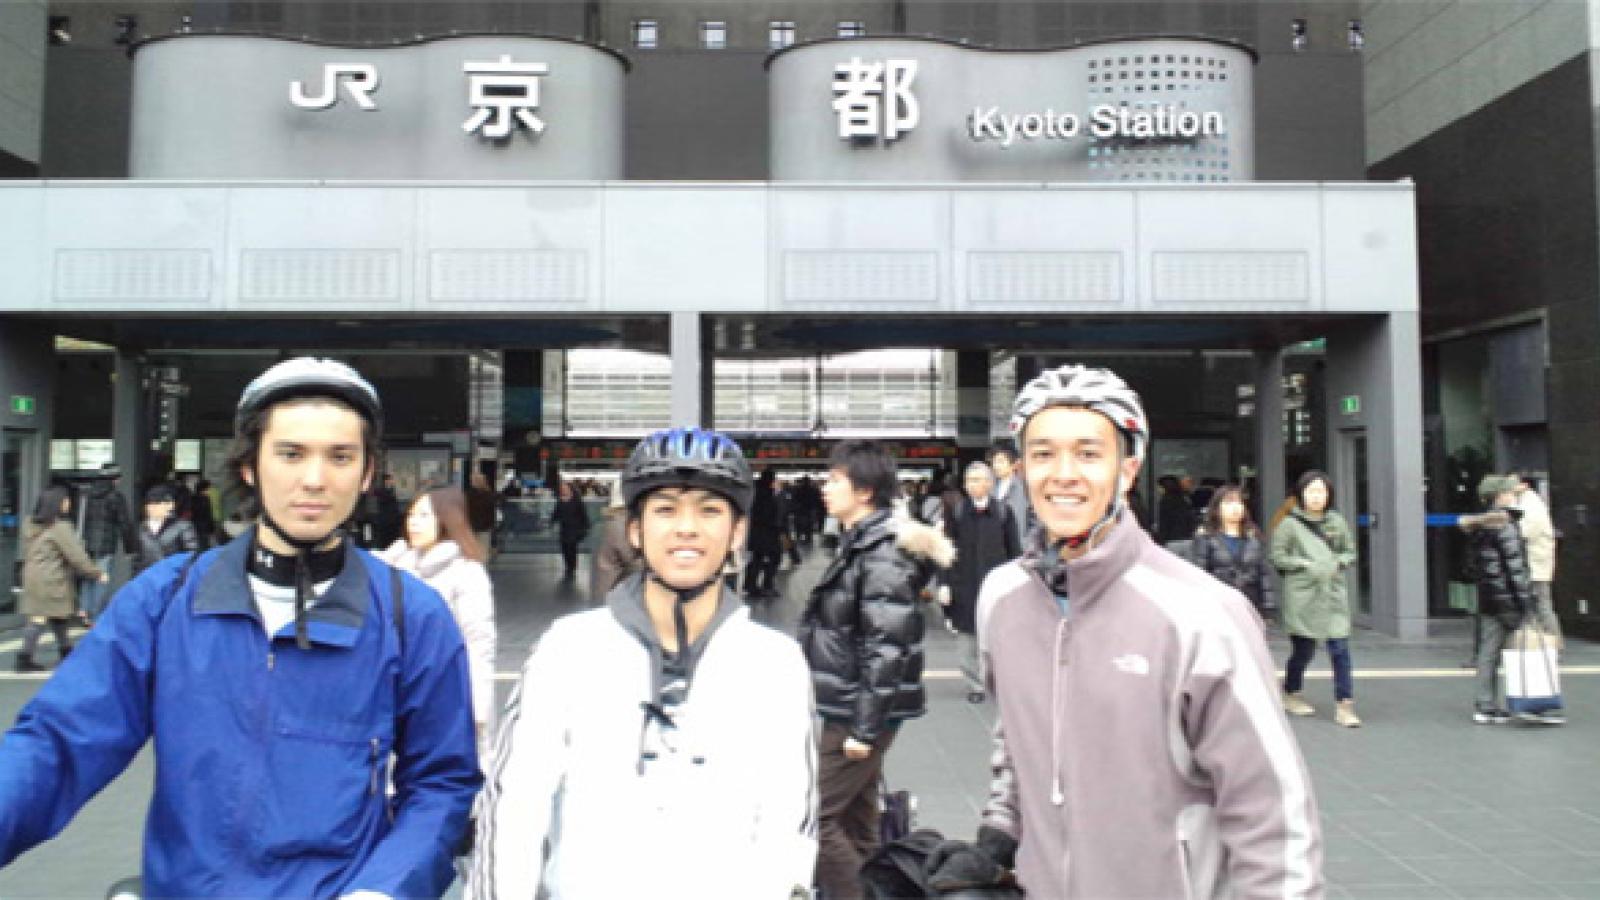 George (right) with roommates on Day 8 of their cycling excursion.